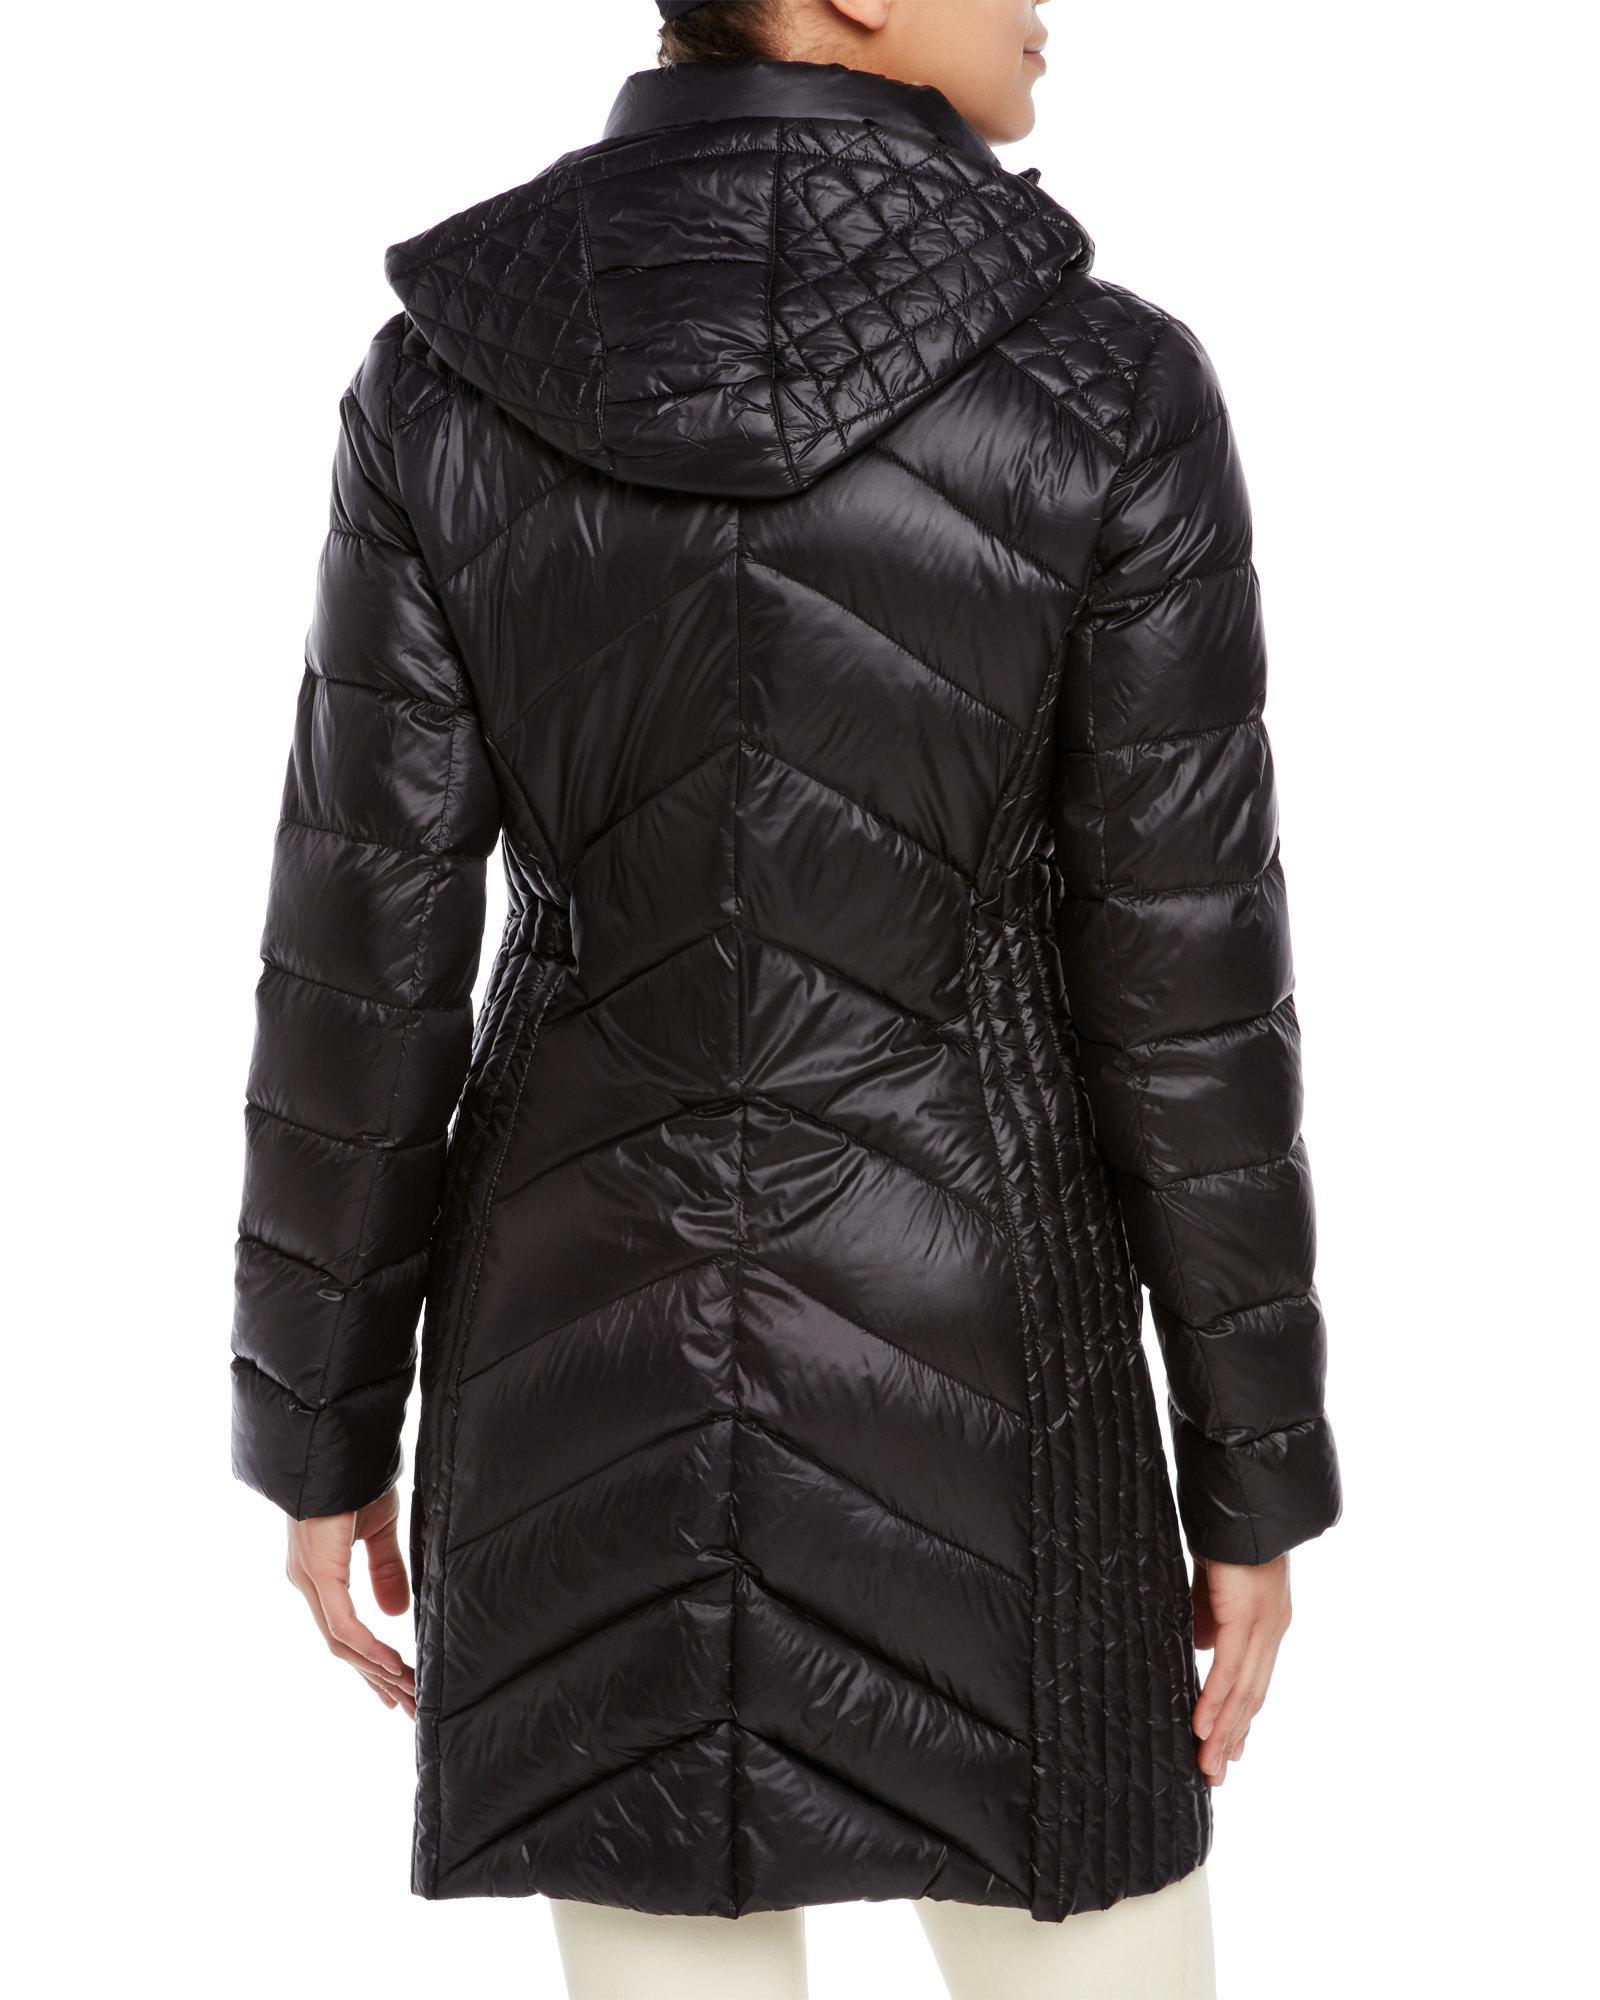 Lyst - Bcbgeneration Ultra Lightweight Packable Down Coat in Black